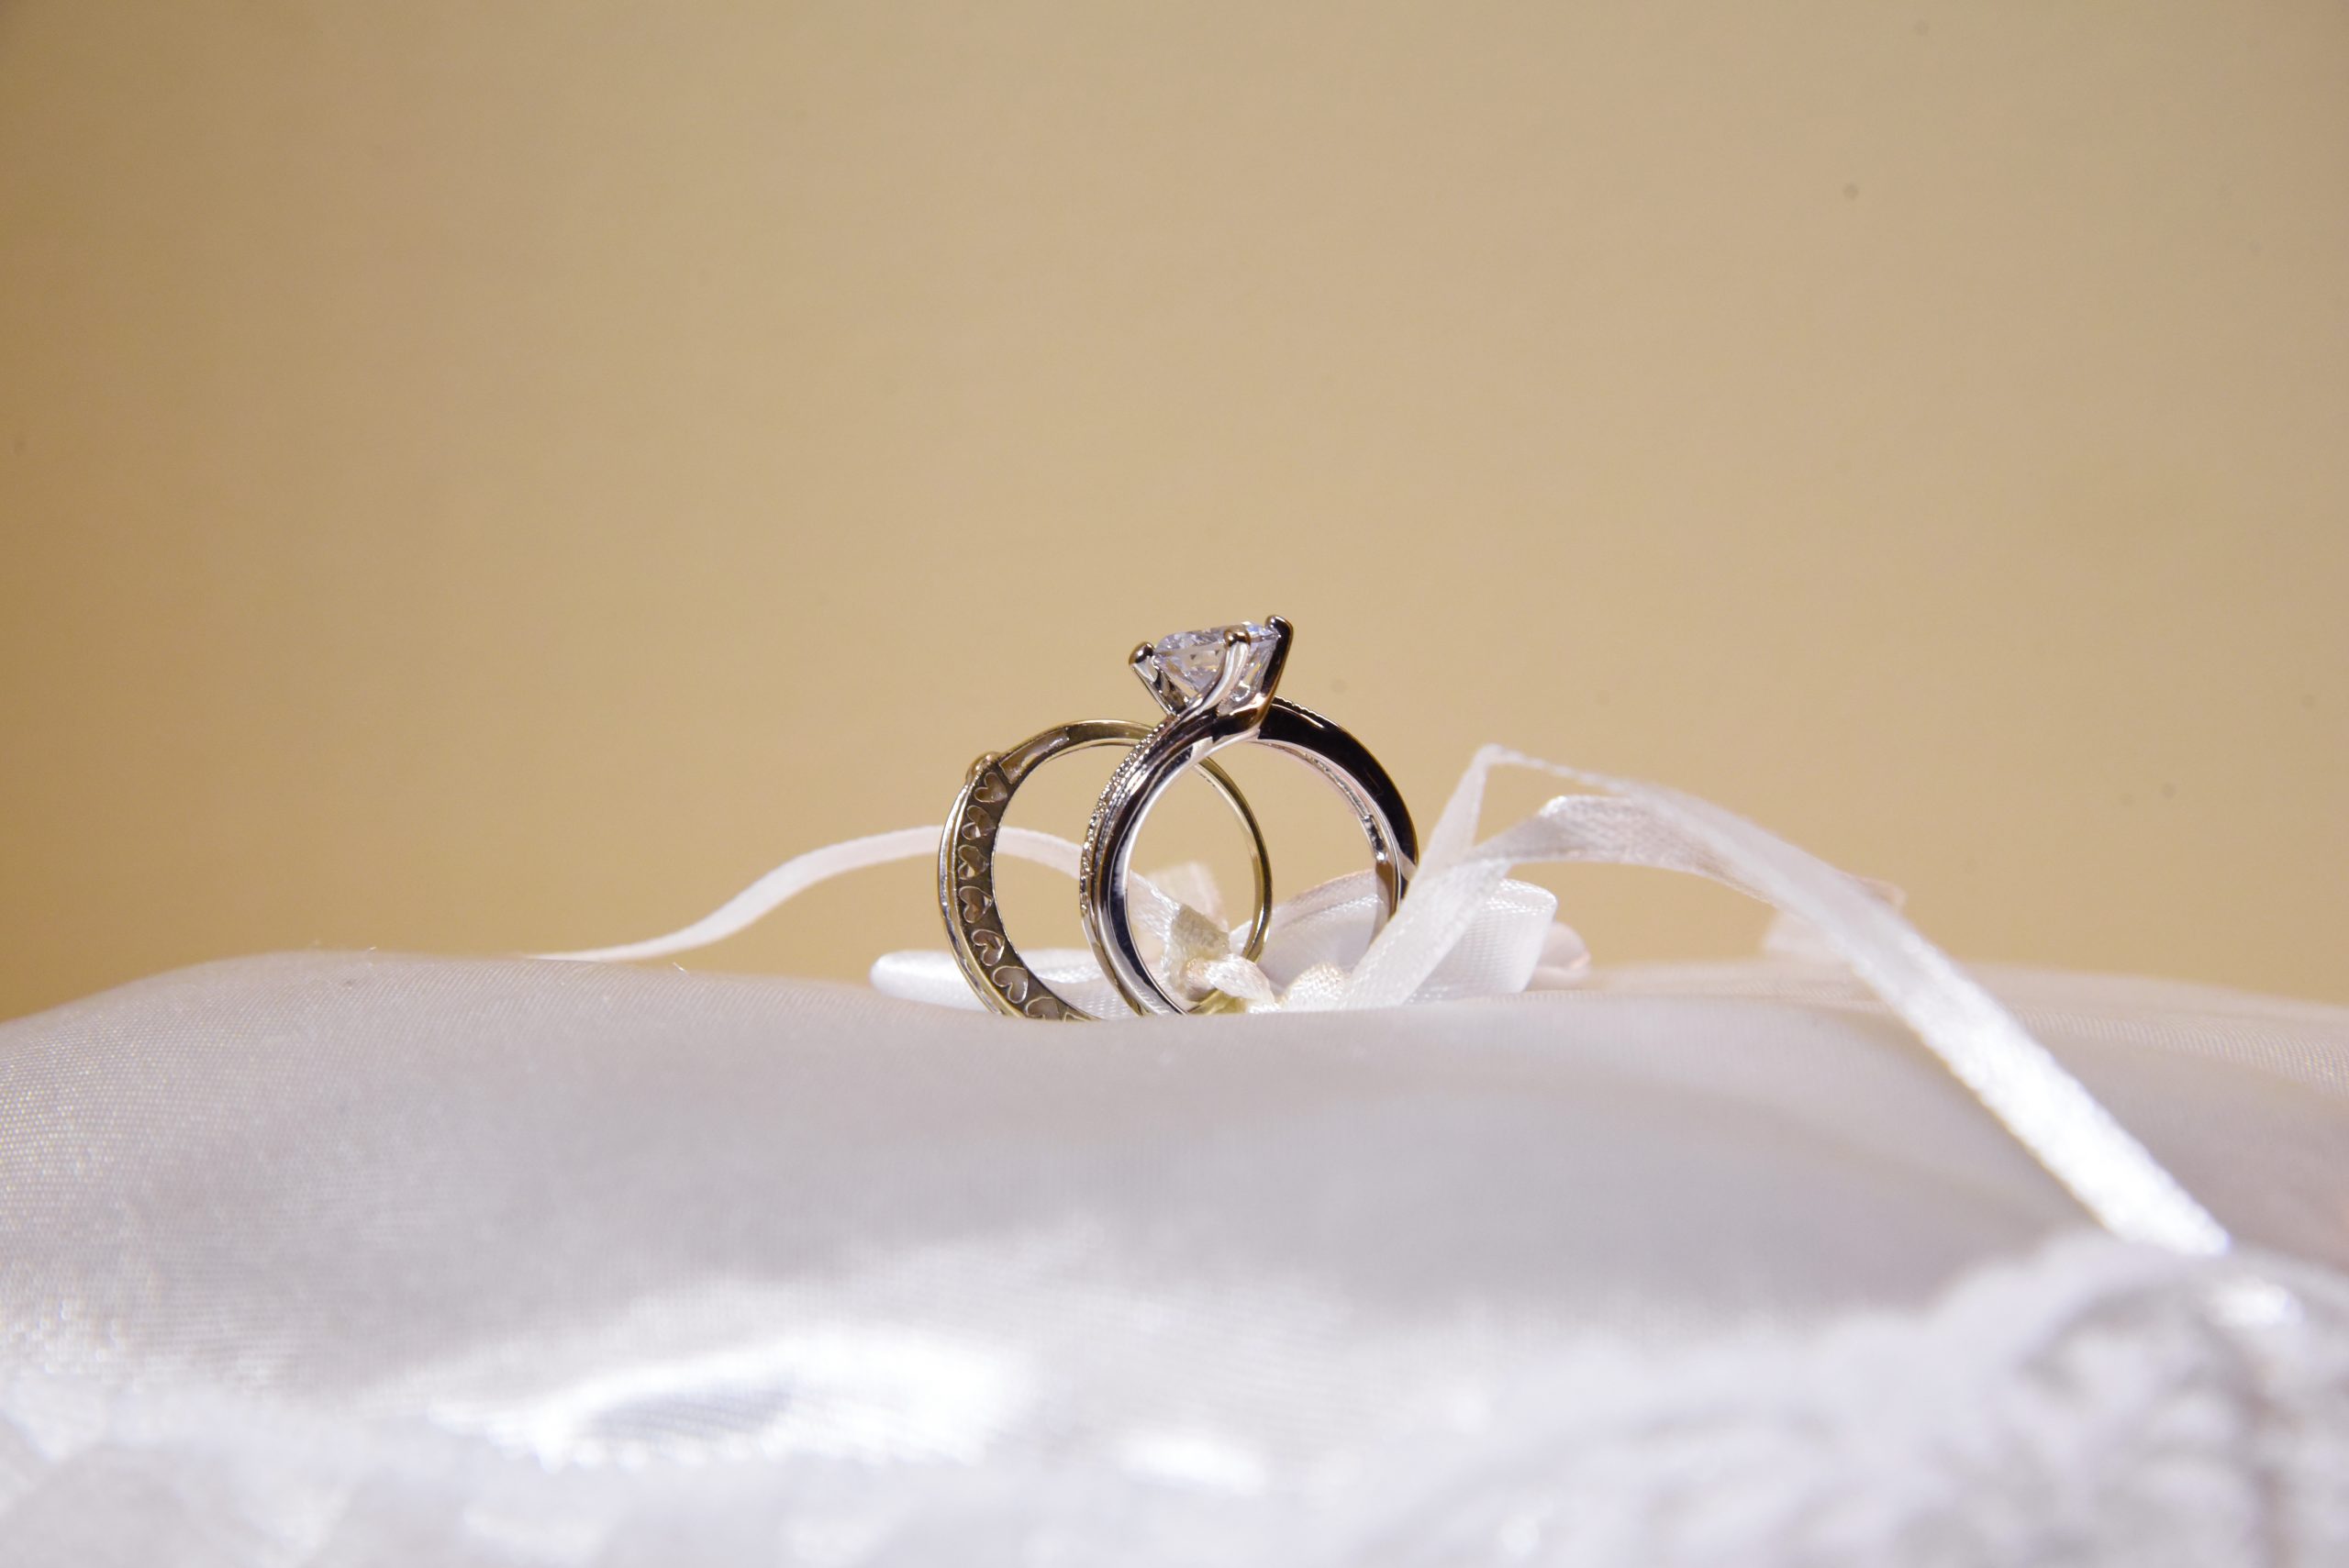 Two diamond wedding rings sitting in the center of a white satin cushion.